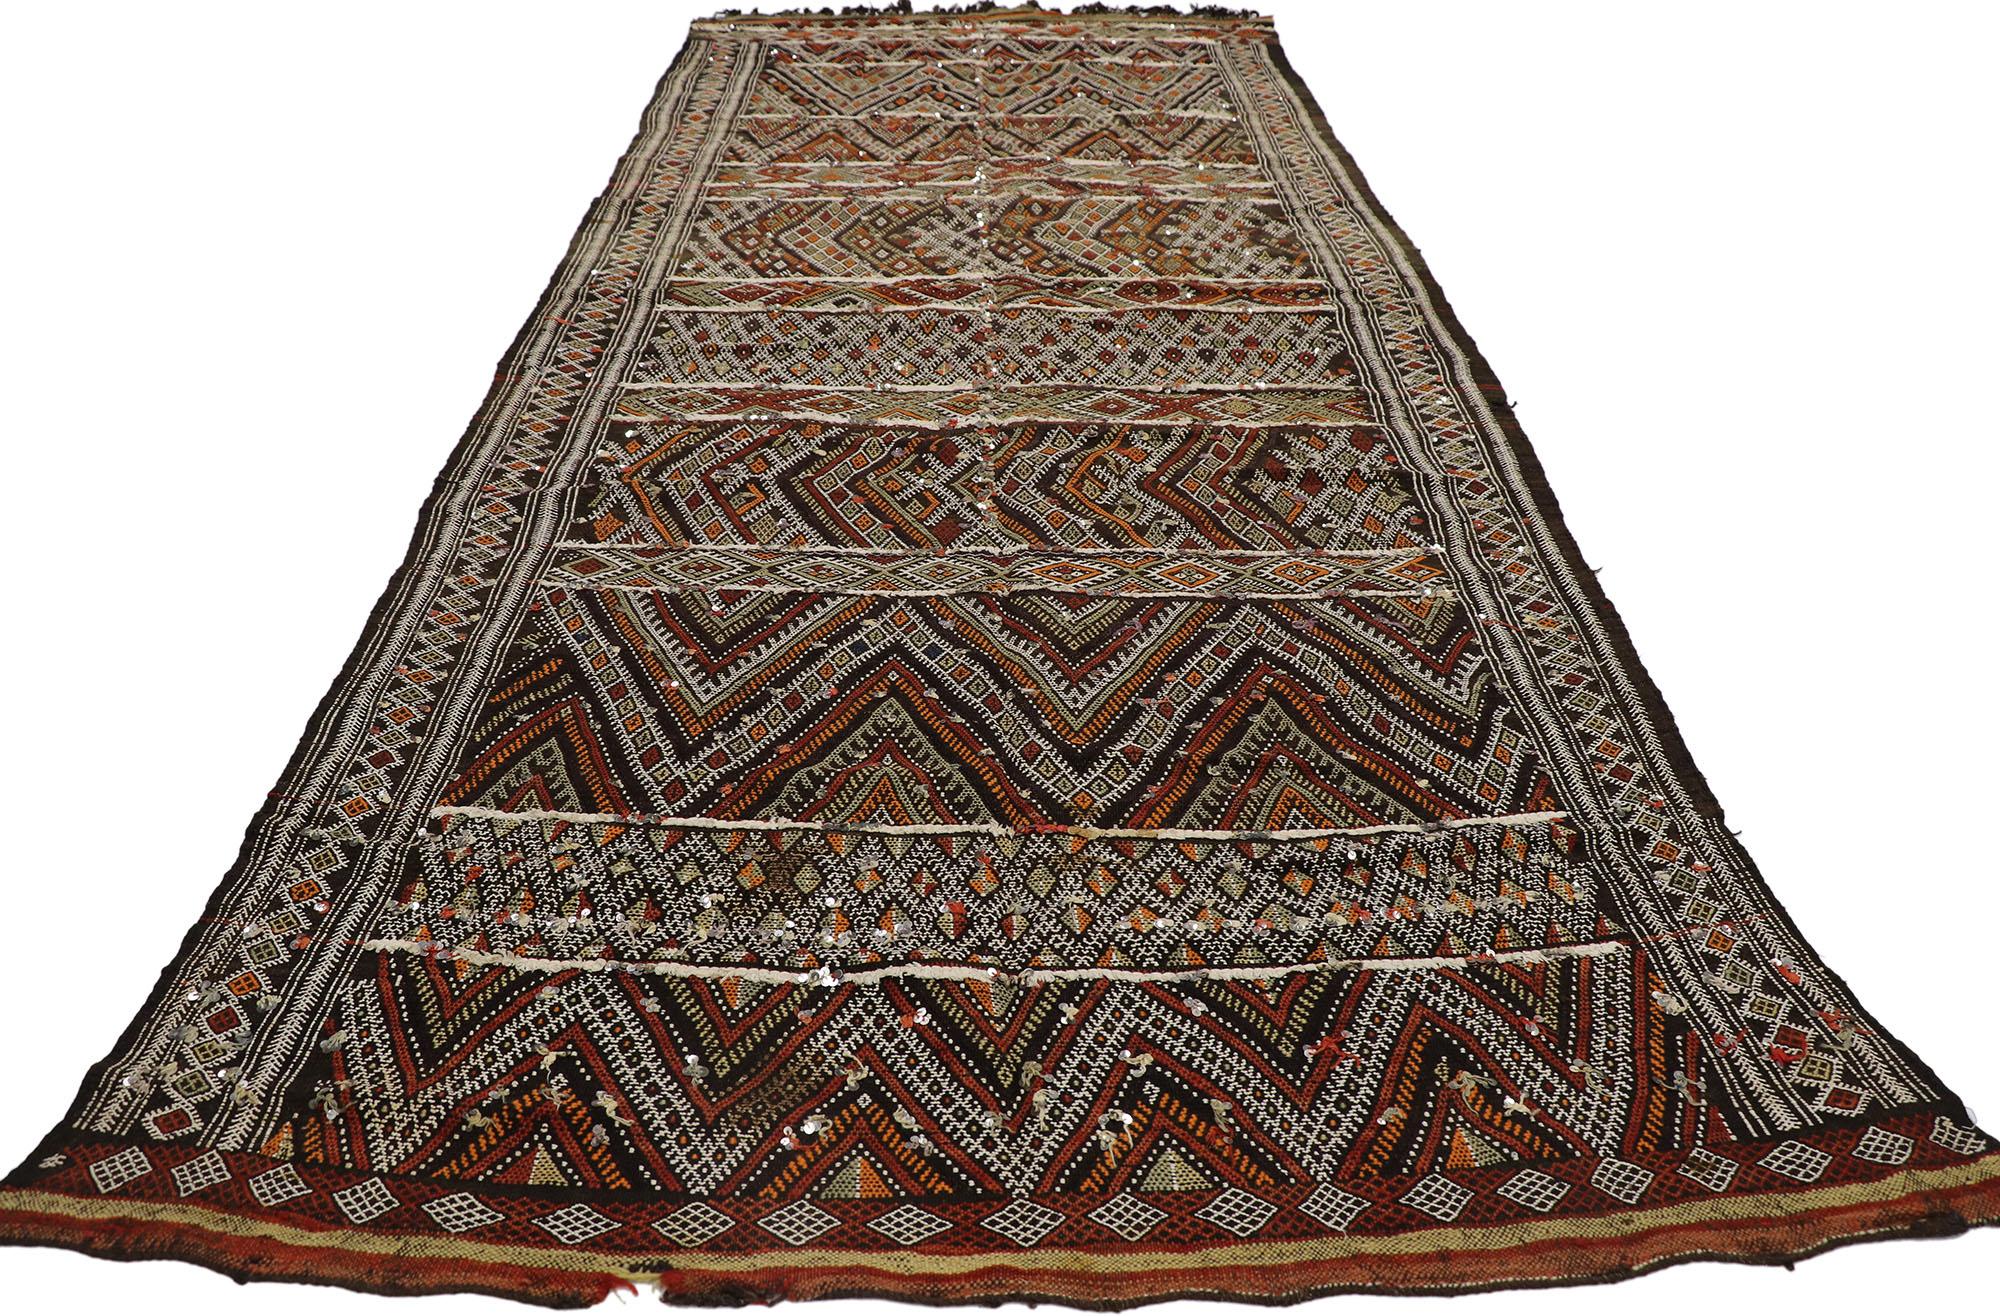 Hand-Woven Vintage Zemmour Moroccan Kilim Runner with Sequins and Tribal Boho Chic Style For Sale